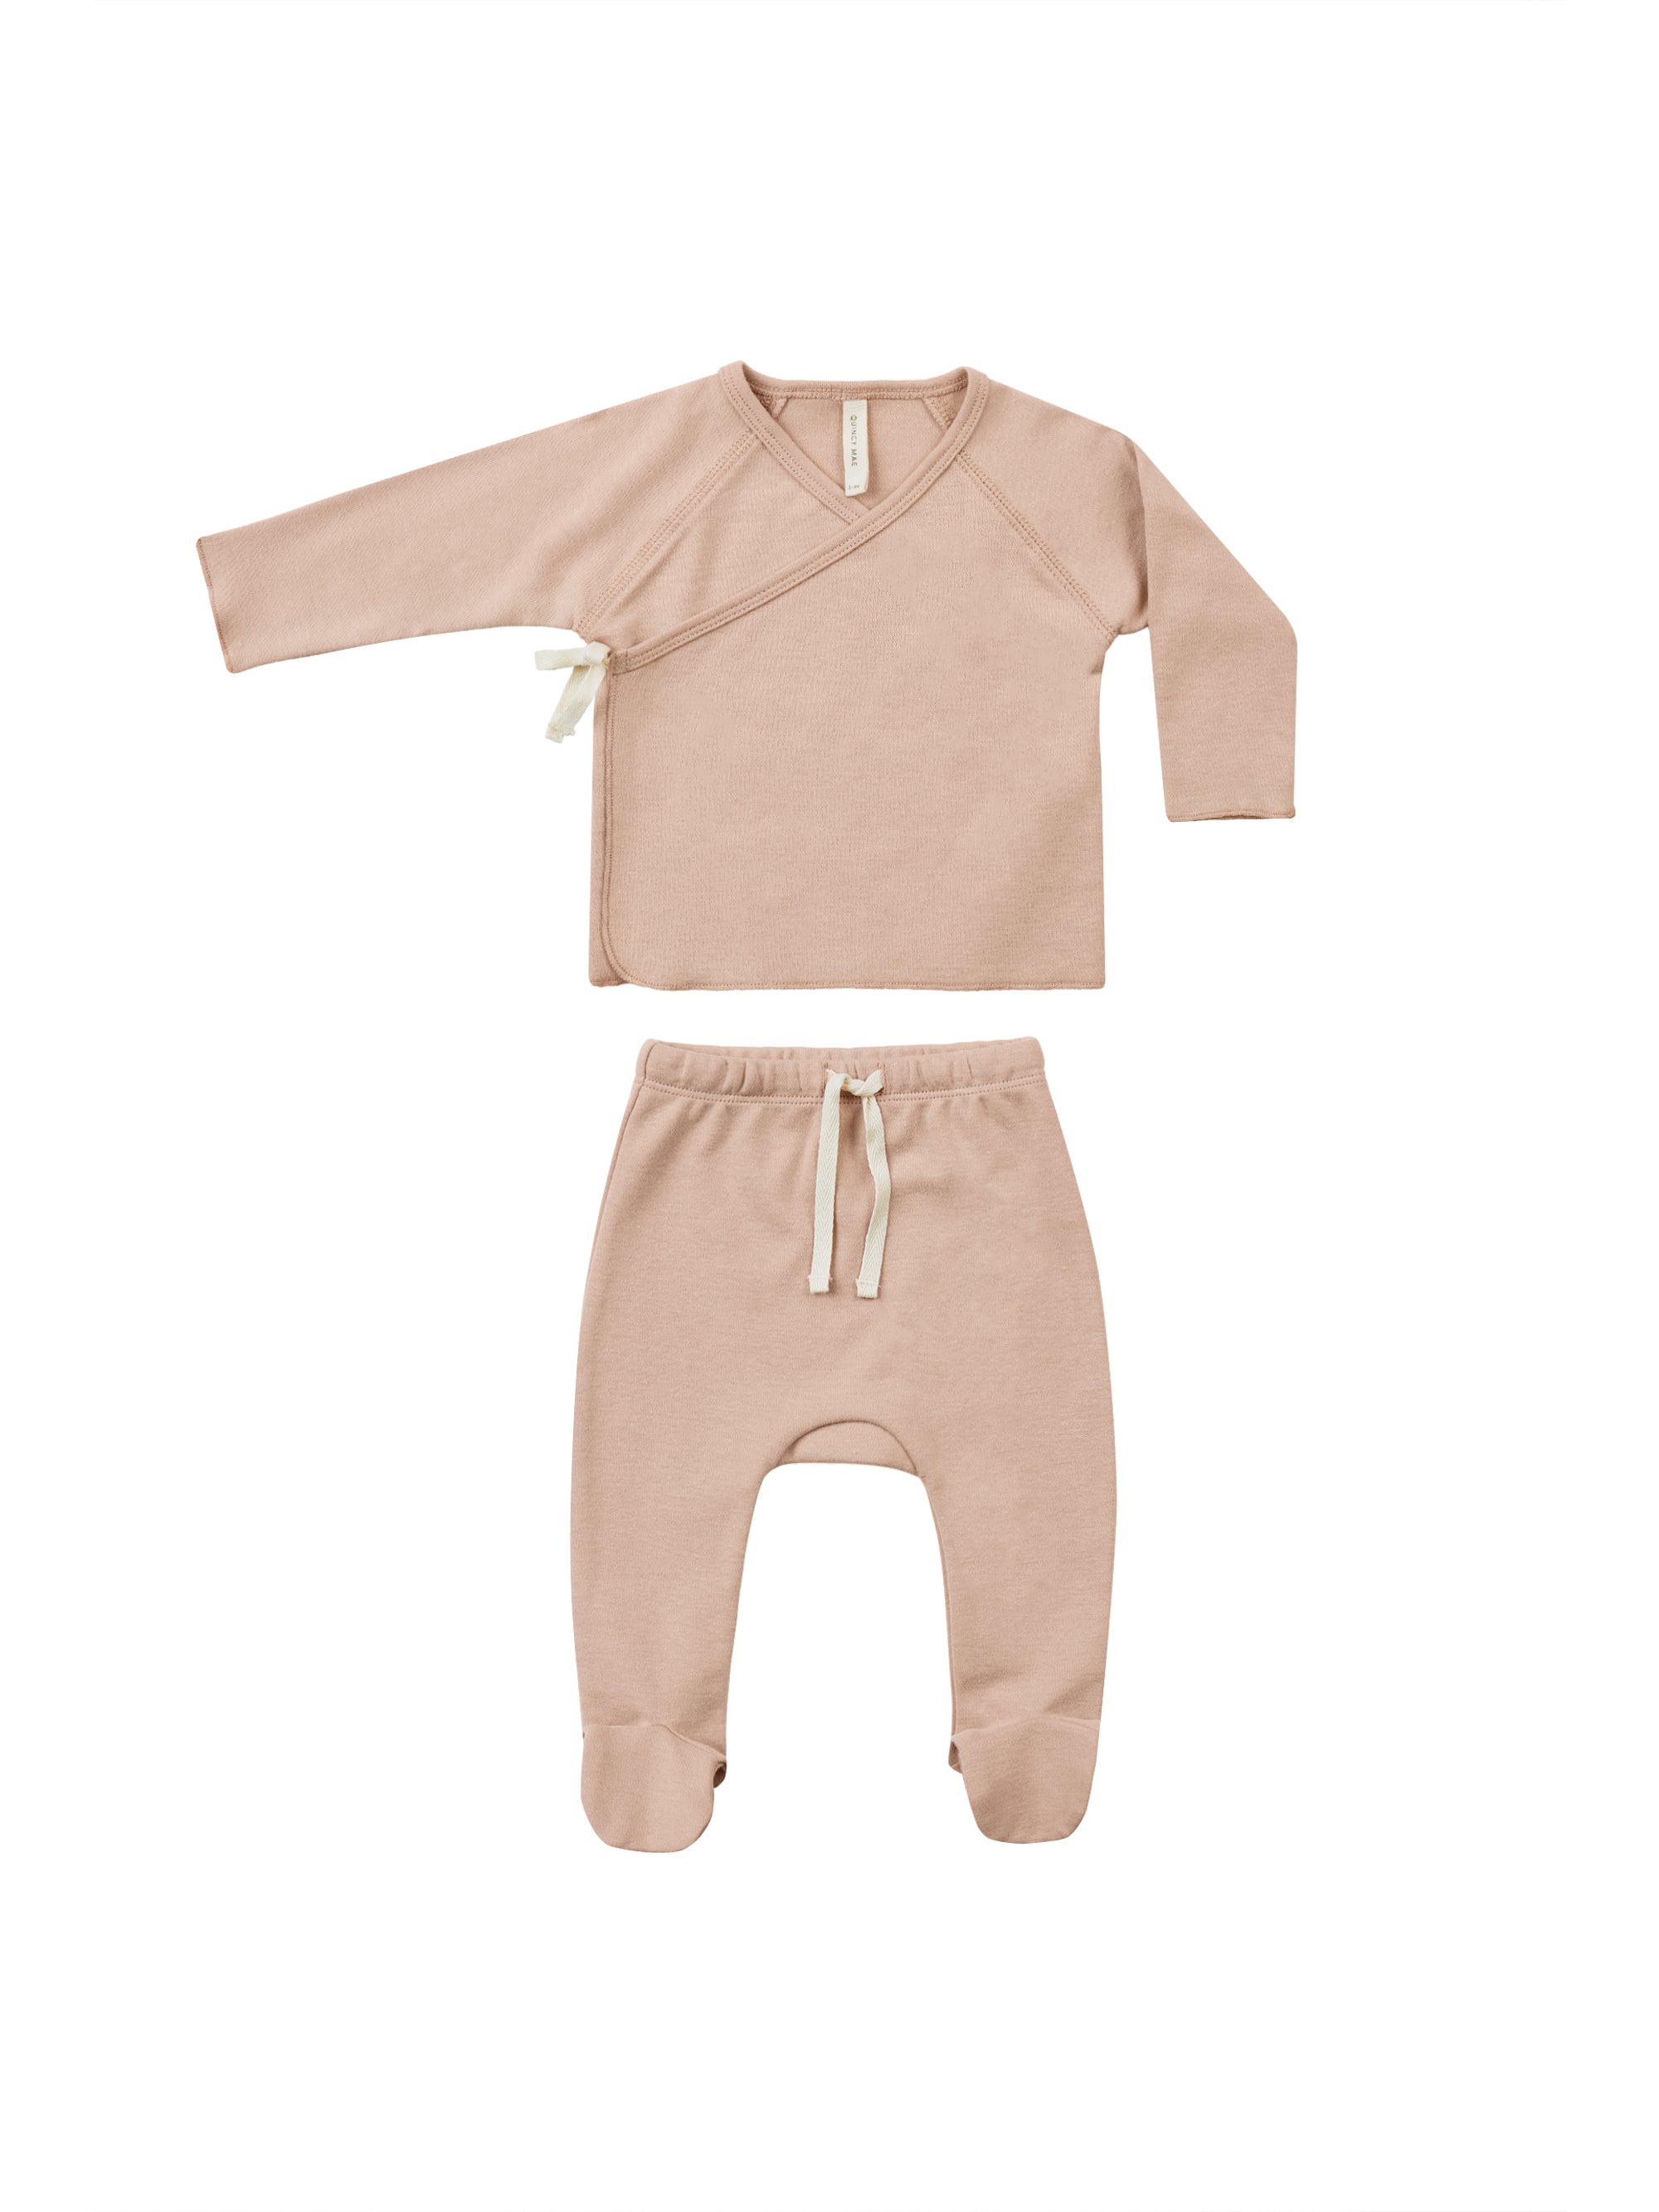 Quincy Mae | Wrap Top + Footed Pant Set || Blush